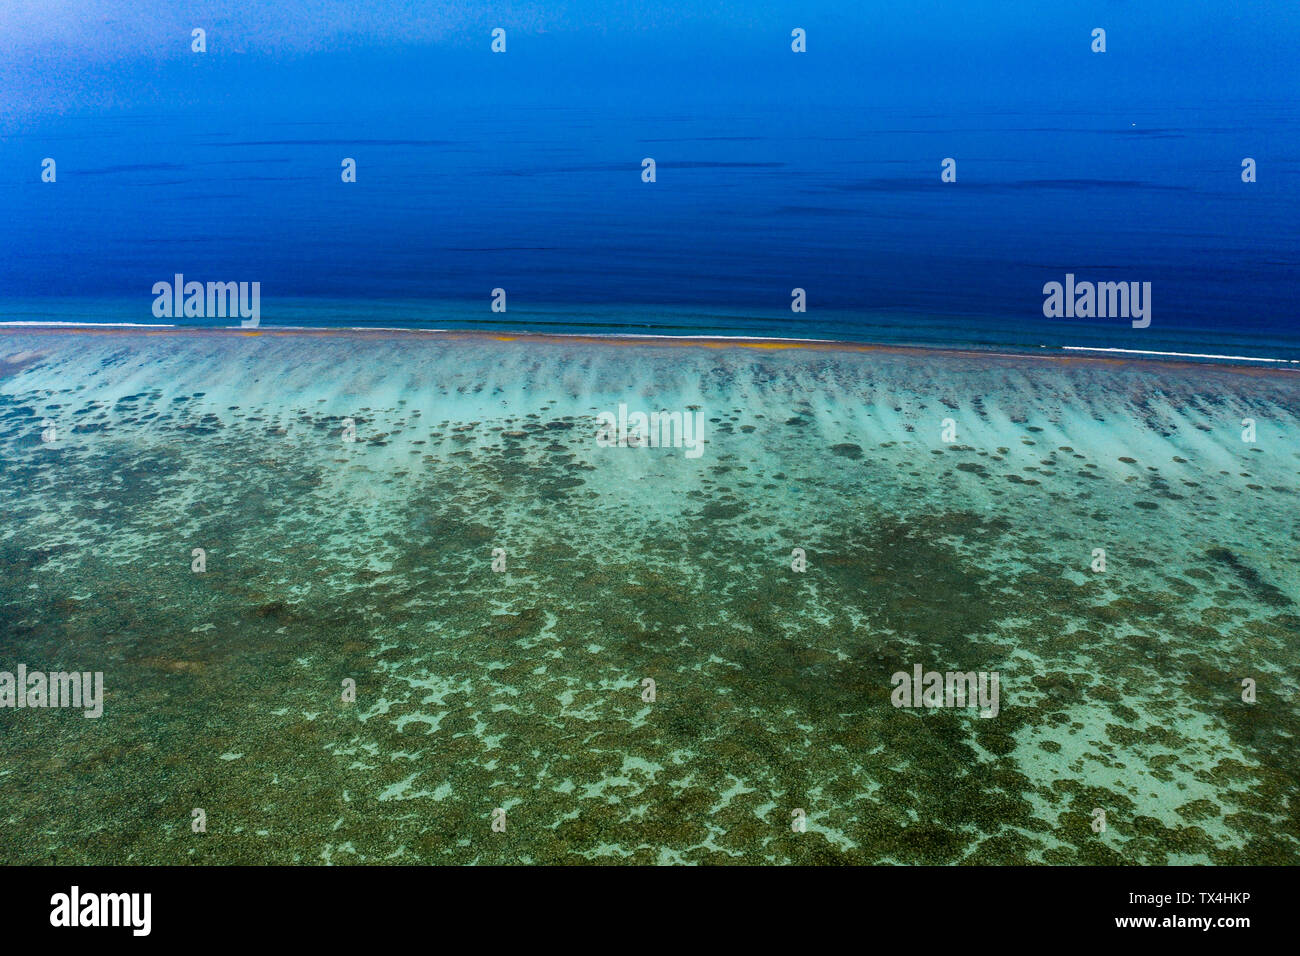 Maldives, South Male Atoll, aerial view of reef of an atoll Stock Photo